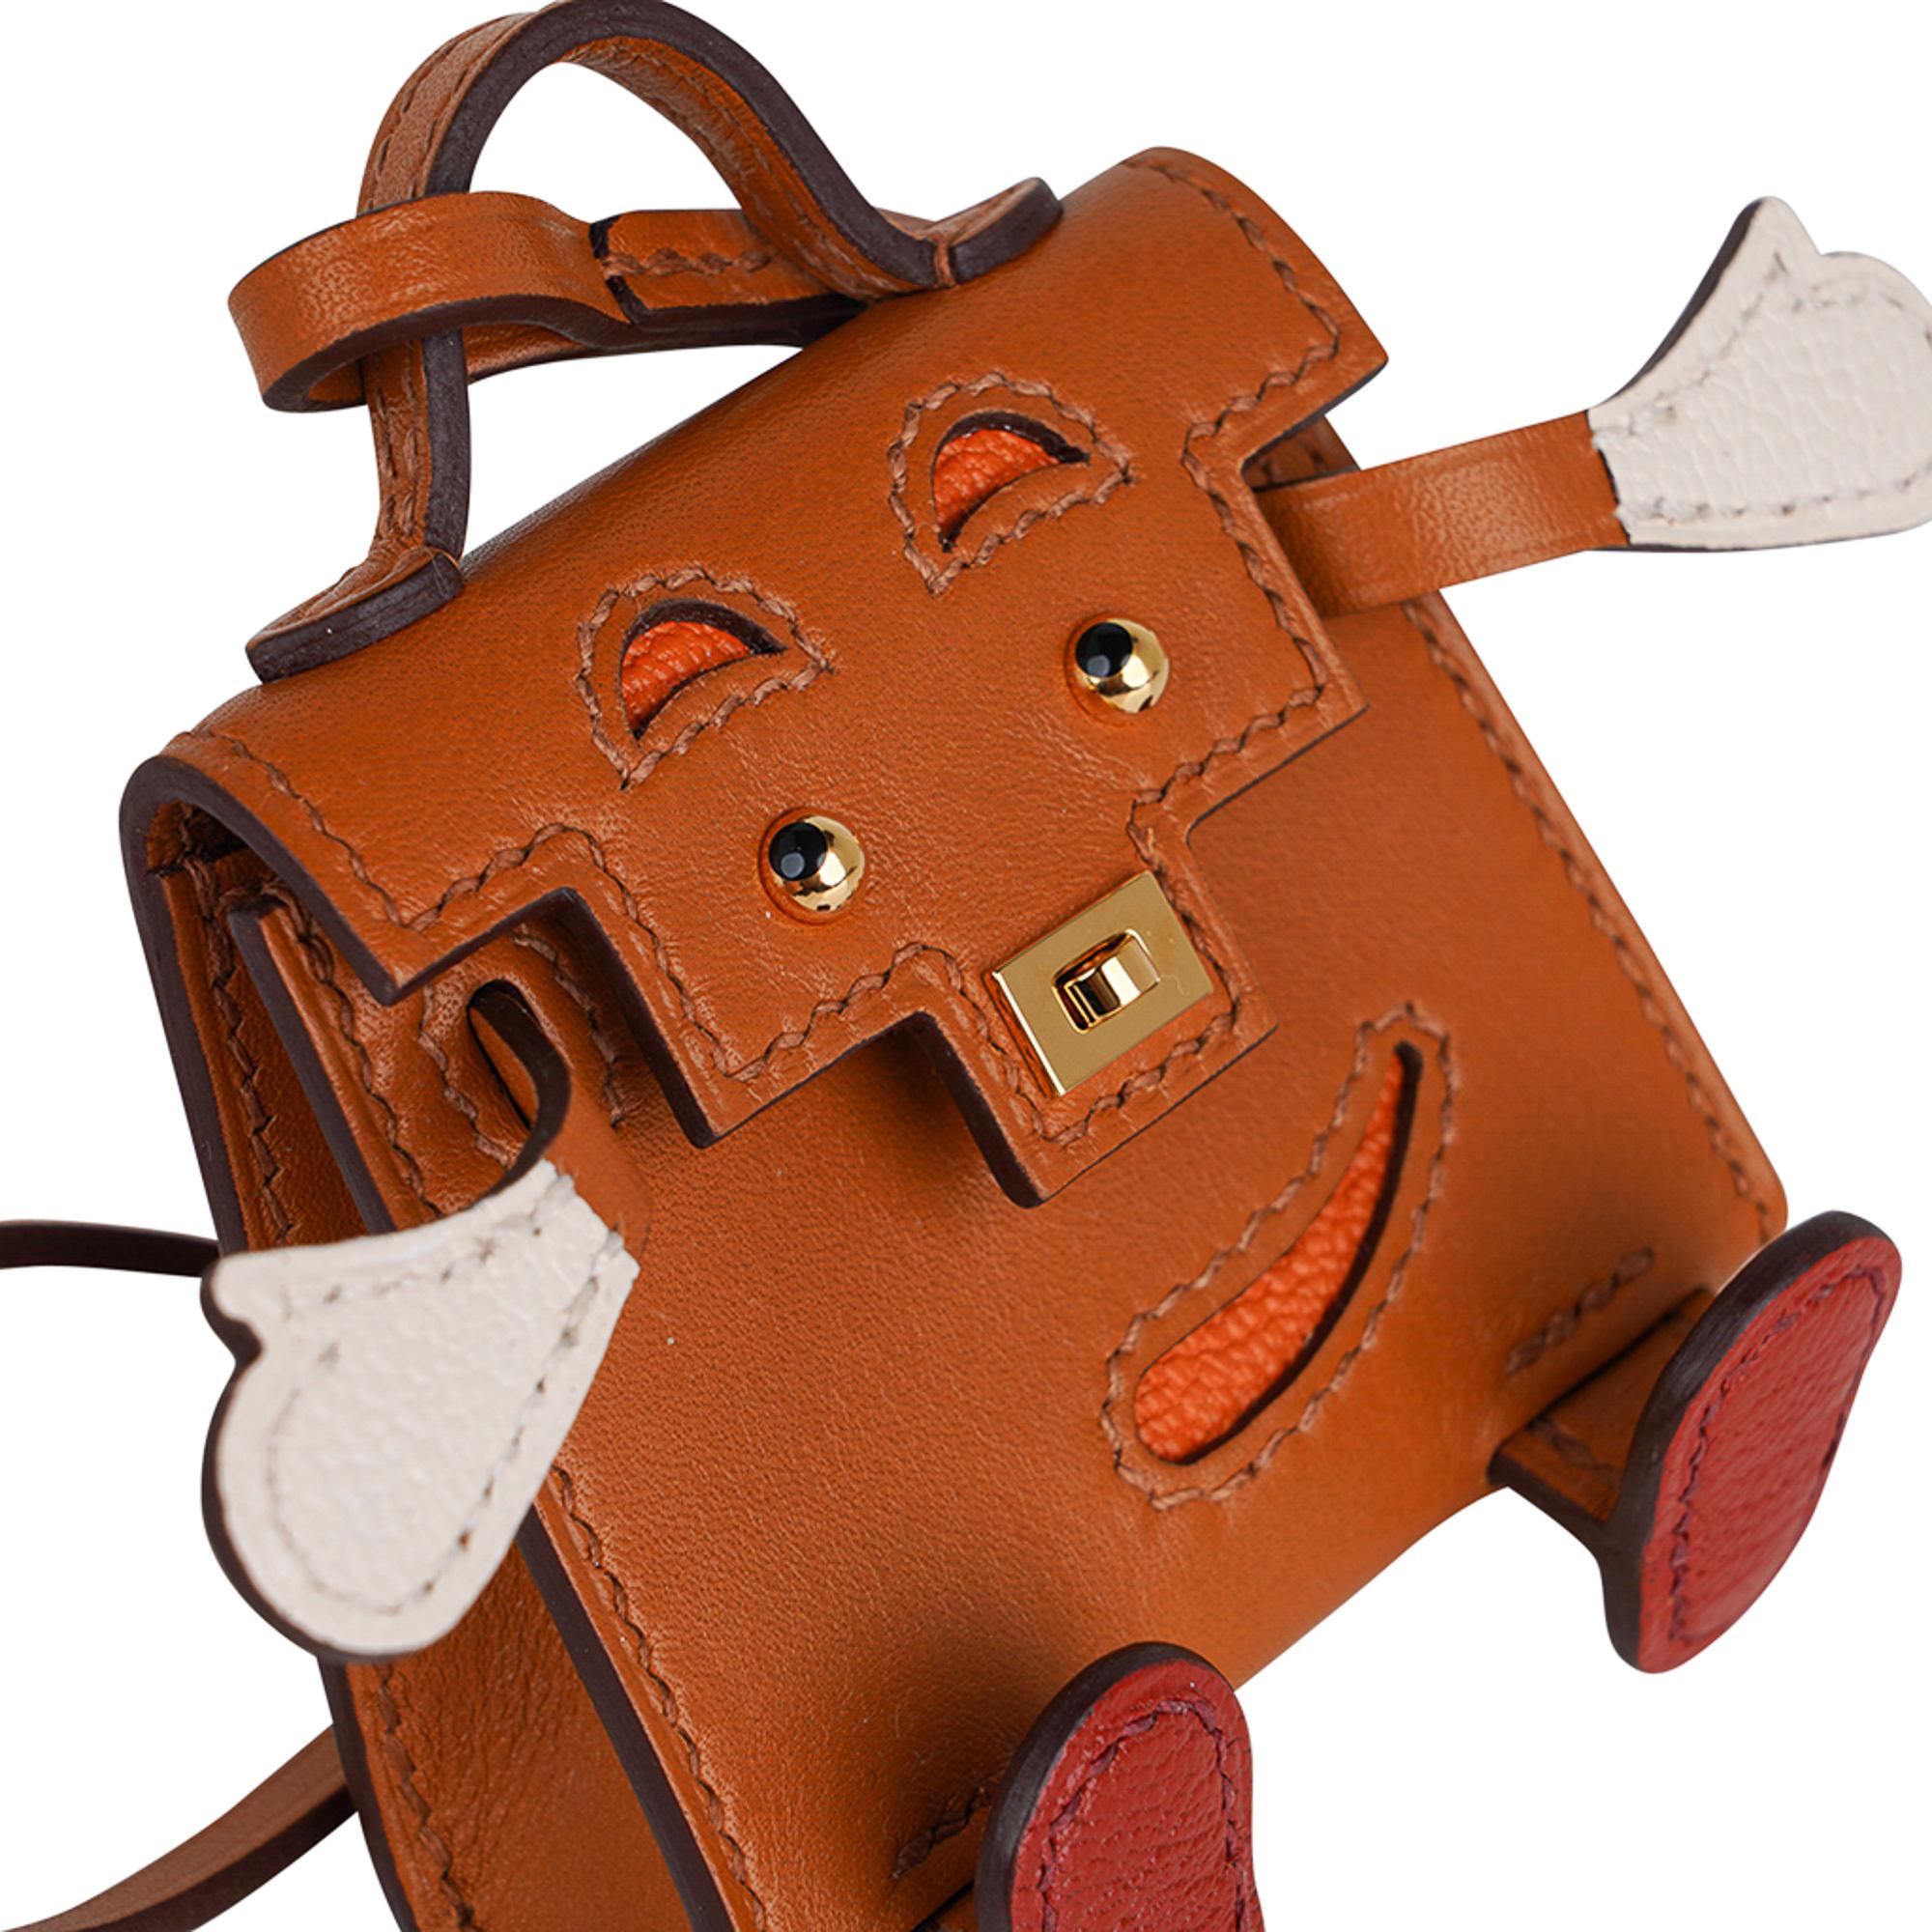 Mightychic offers a very rare limited edition Hermes Kelly Idole bag charm featured in Sable, Nata, H Orange and Brique Tadelakt leather.
Whimsical and delightful this fabulous charm has a turn lock that works.
Gold hardware accentuates the naughty